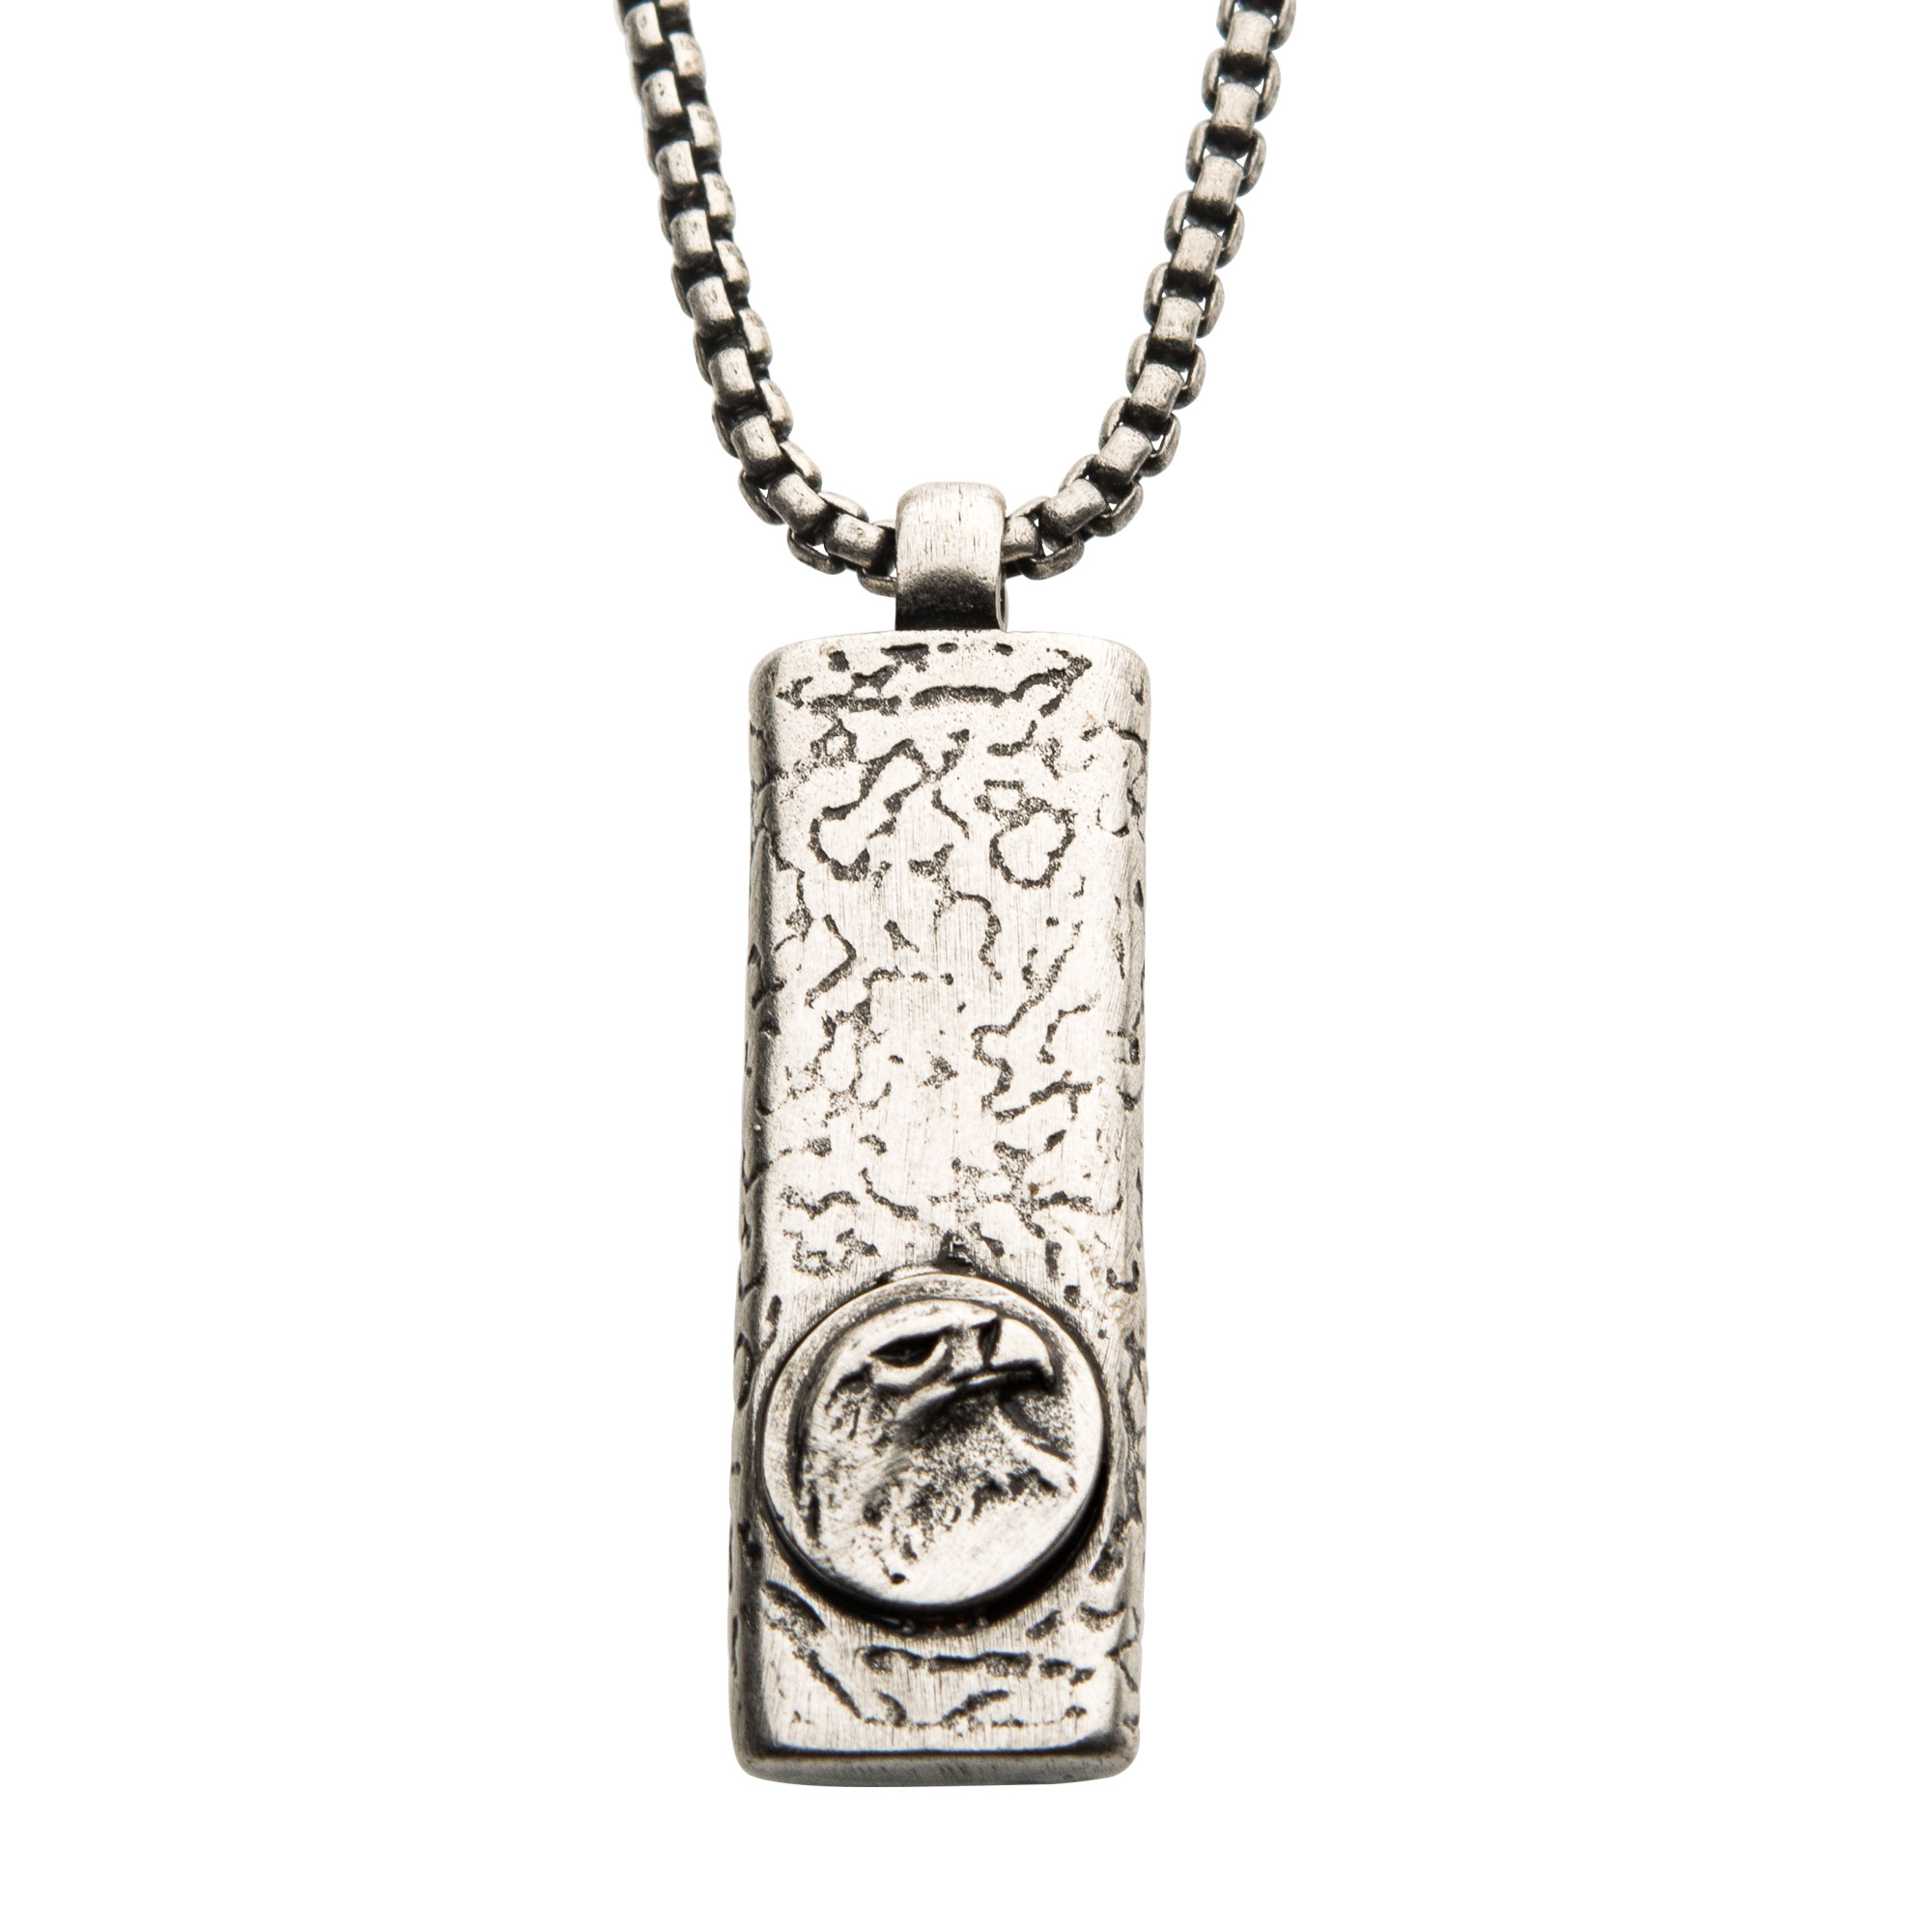 Stainless Steel Silver Plated Dog Tag Pendant with Eagle Head Inlay, with Steel Box Chain Ken Walker Jewelers Gig Harbor, WA